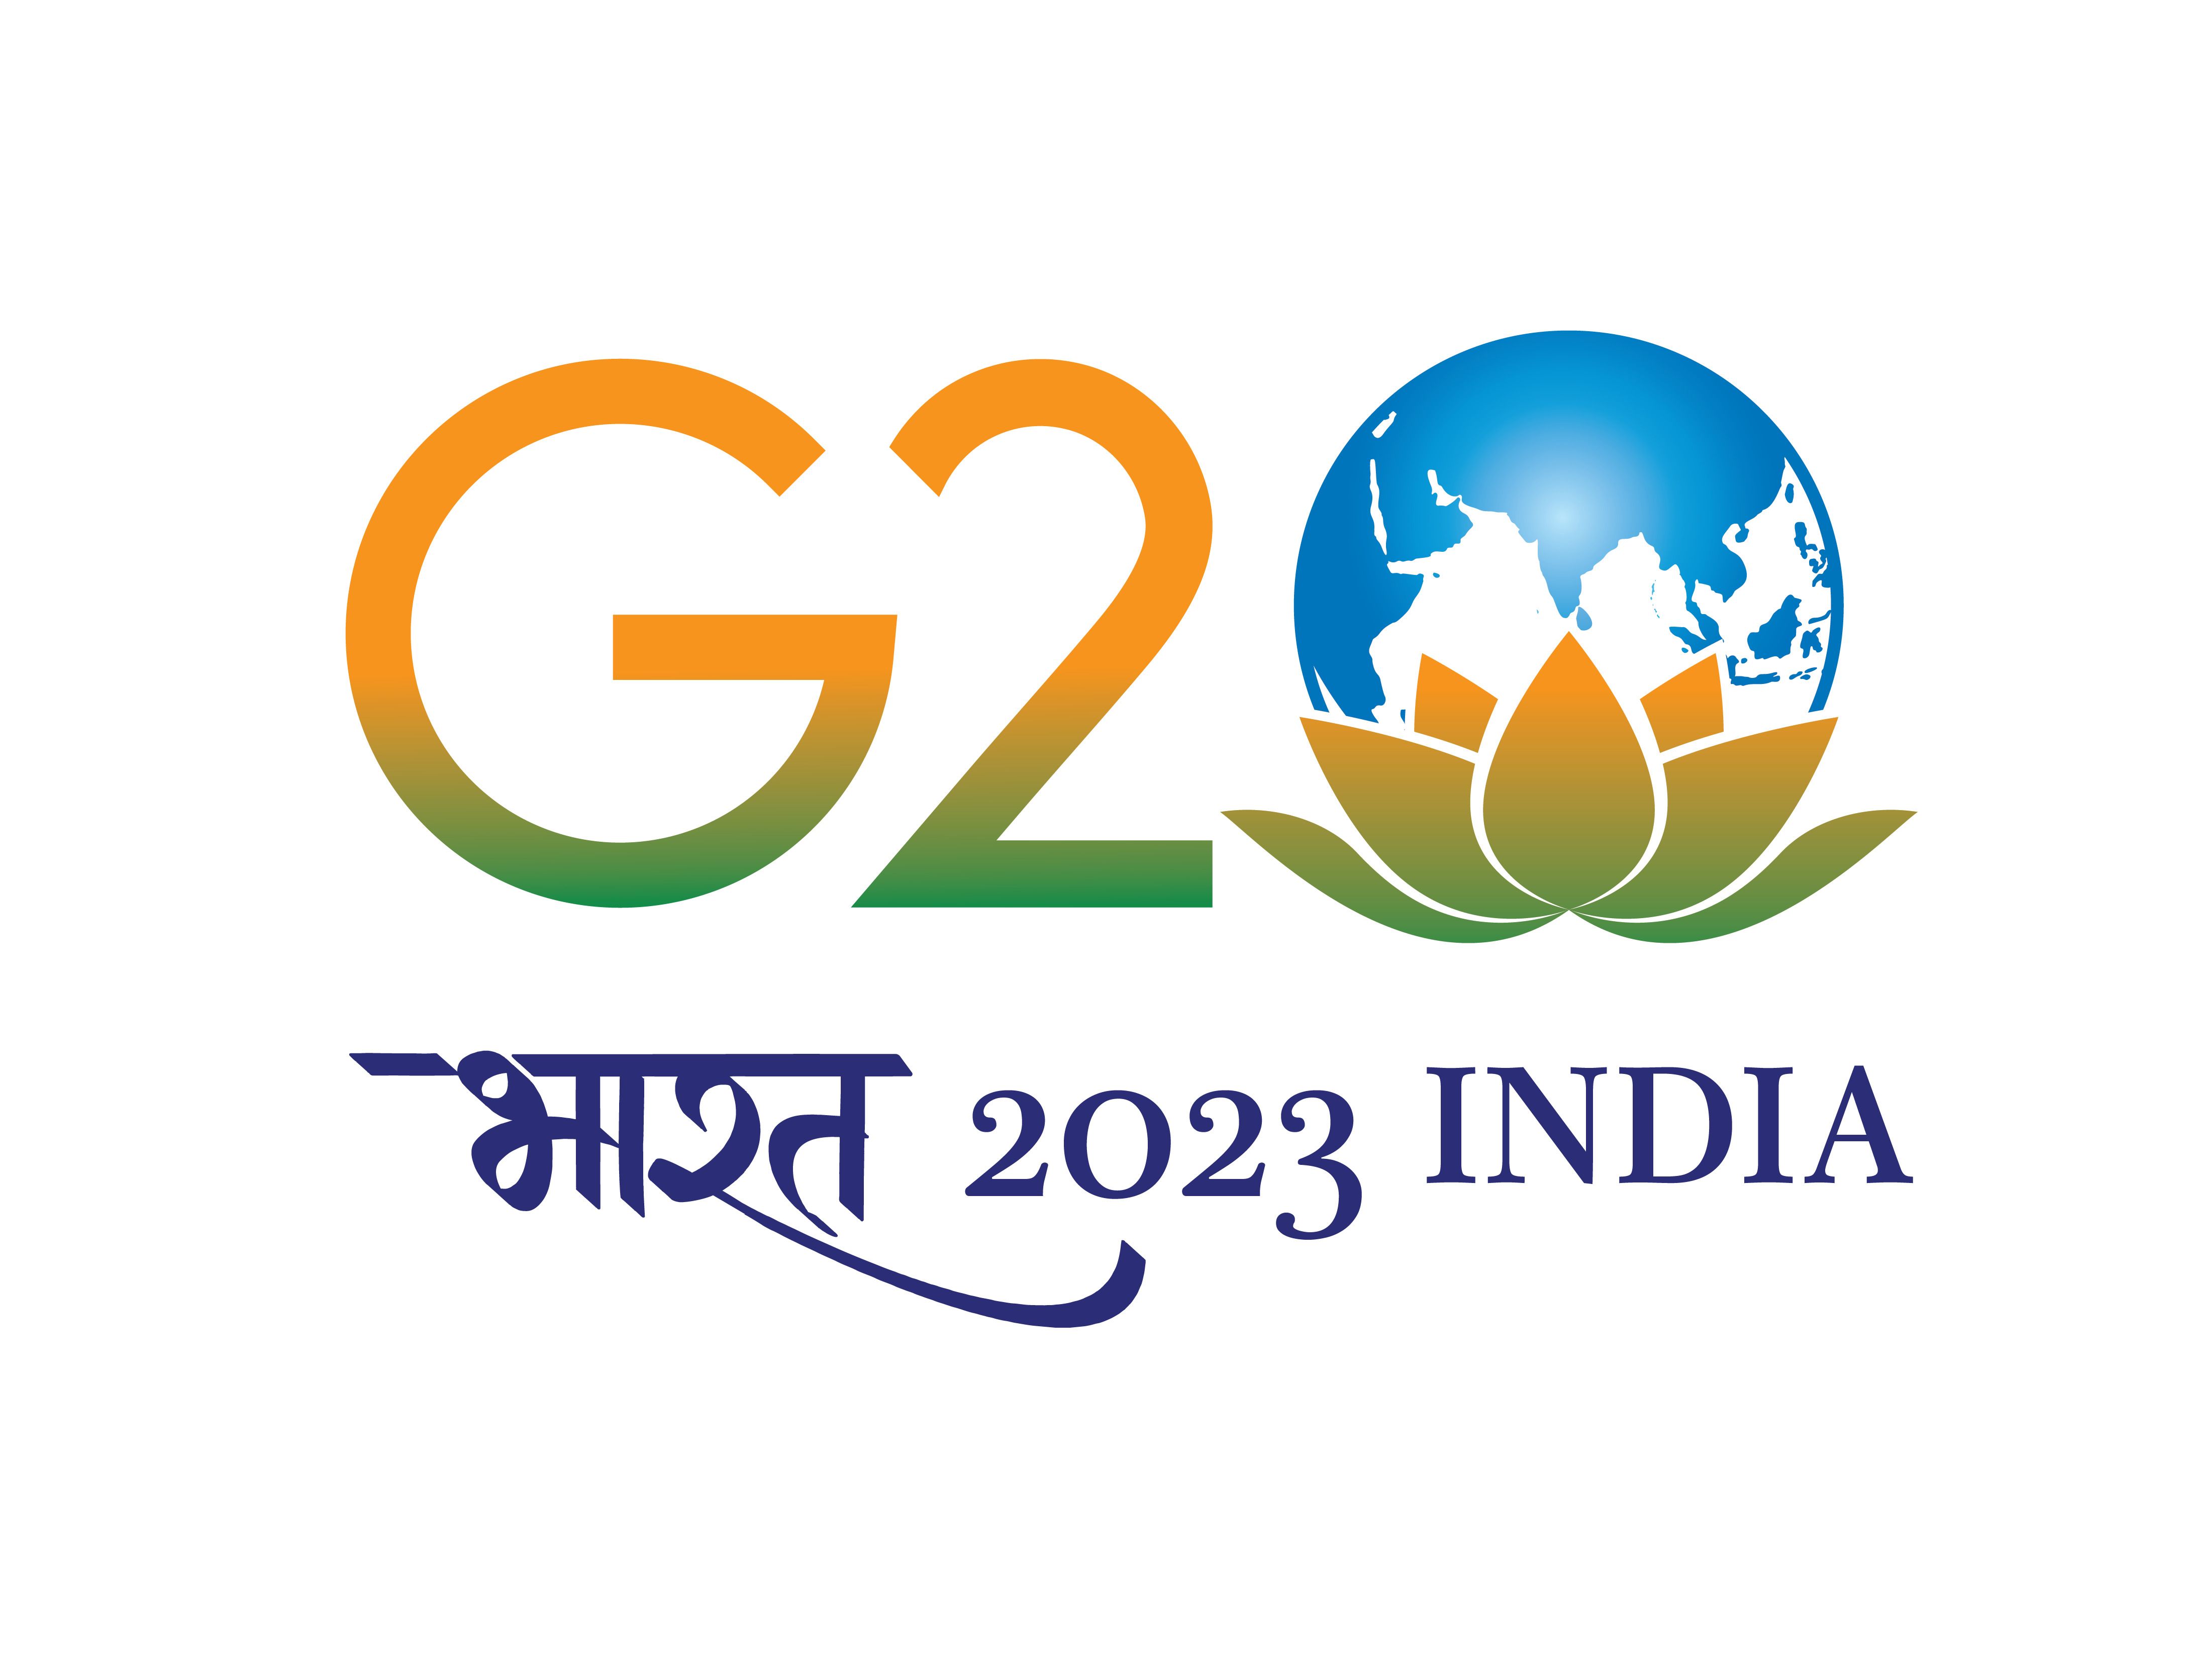 African Union becomes permanent member of G20 under India's presidency
